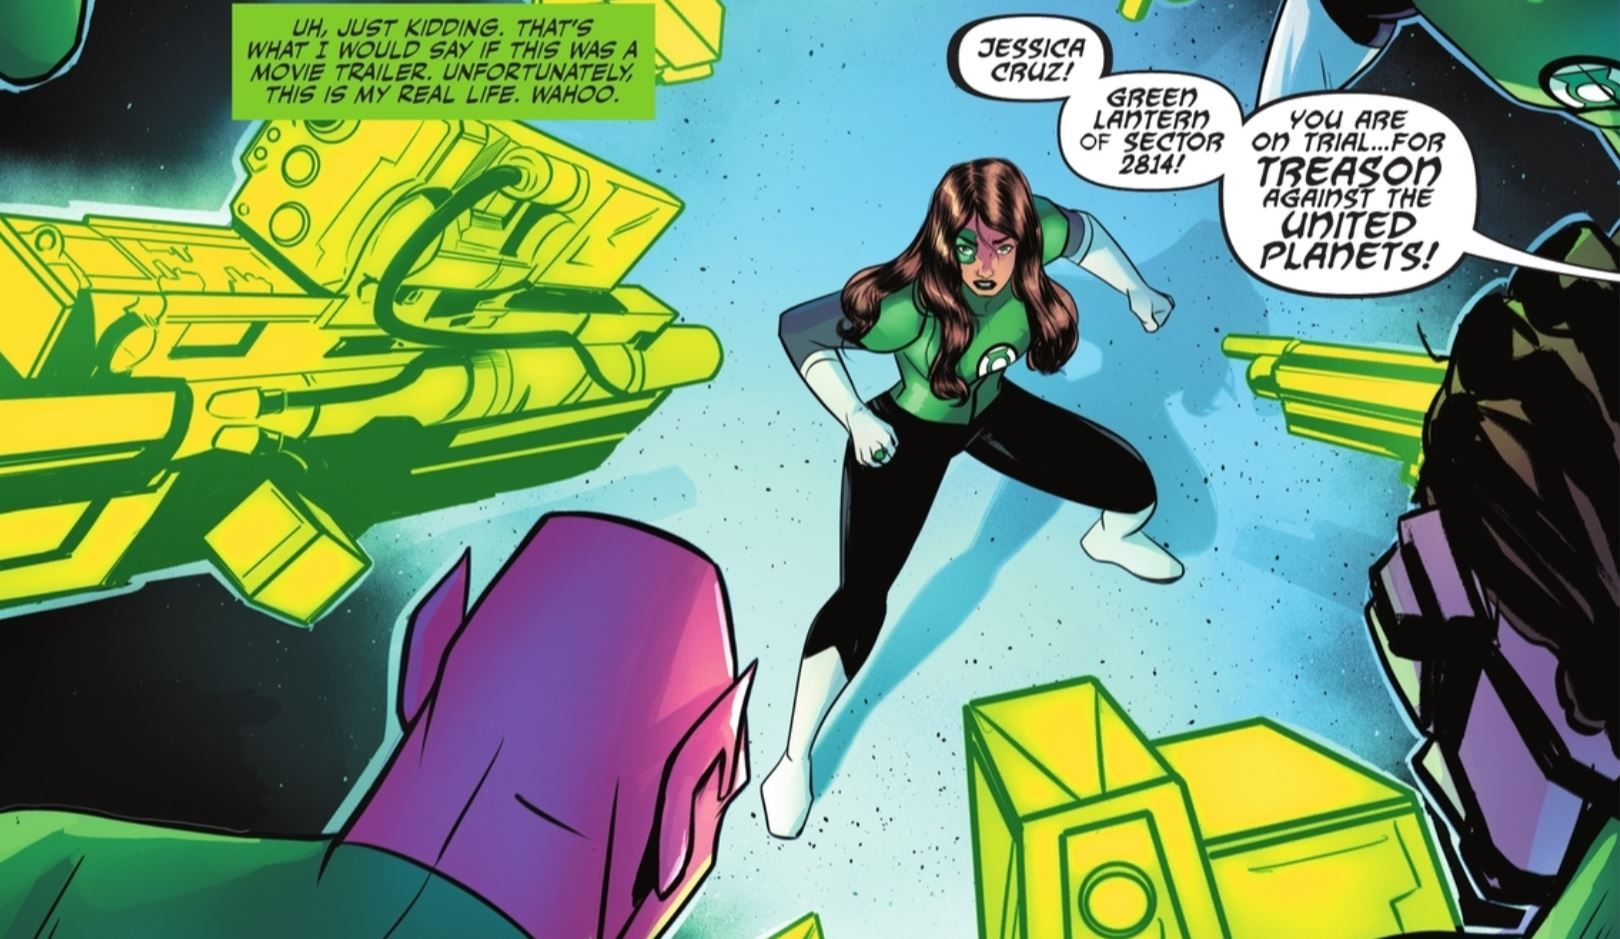 Jessica Cruz Arrested by the Green Lantern Corps DC